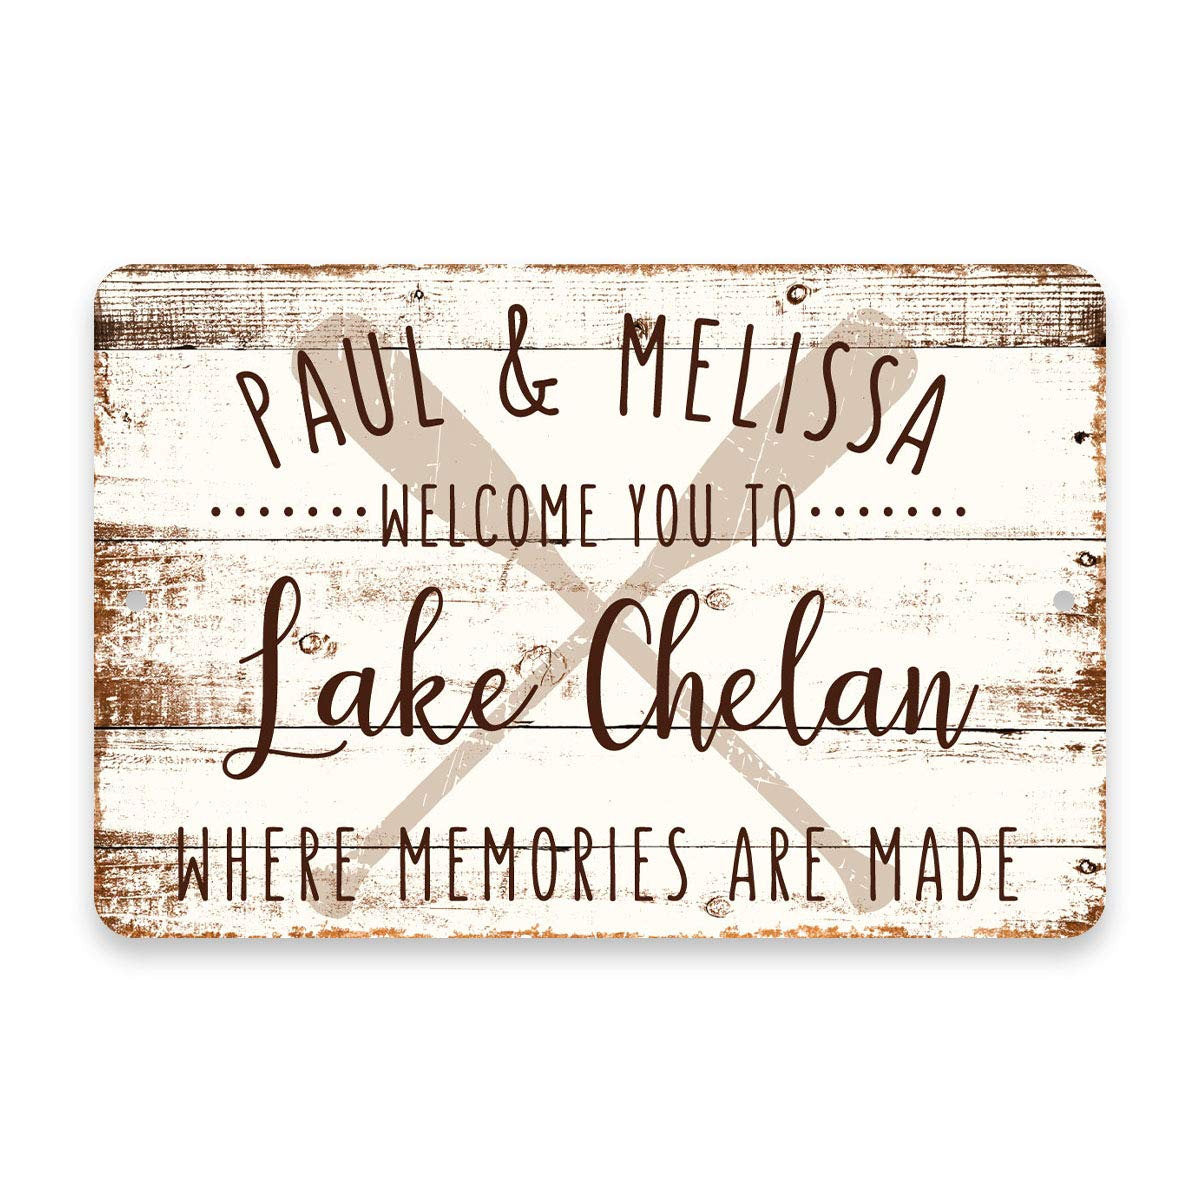 Personalized Welcome to Lake Chelan Where Memories are Made Sign - 8 X 12 Metal Sign with Wood Look